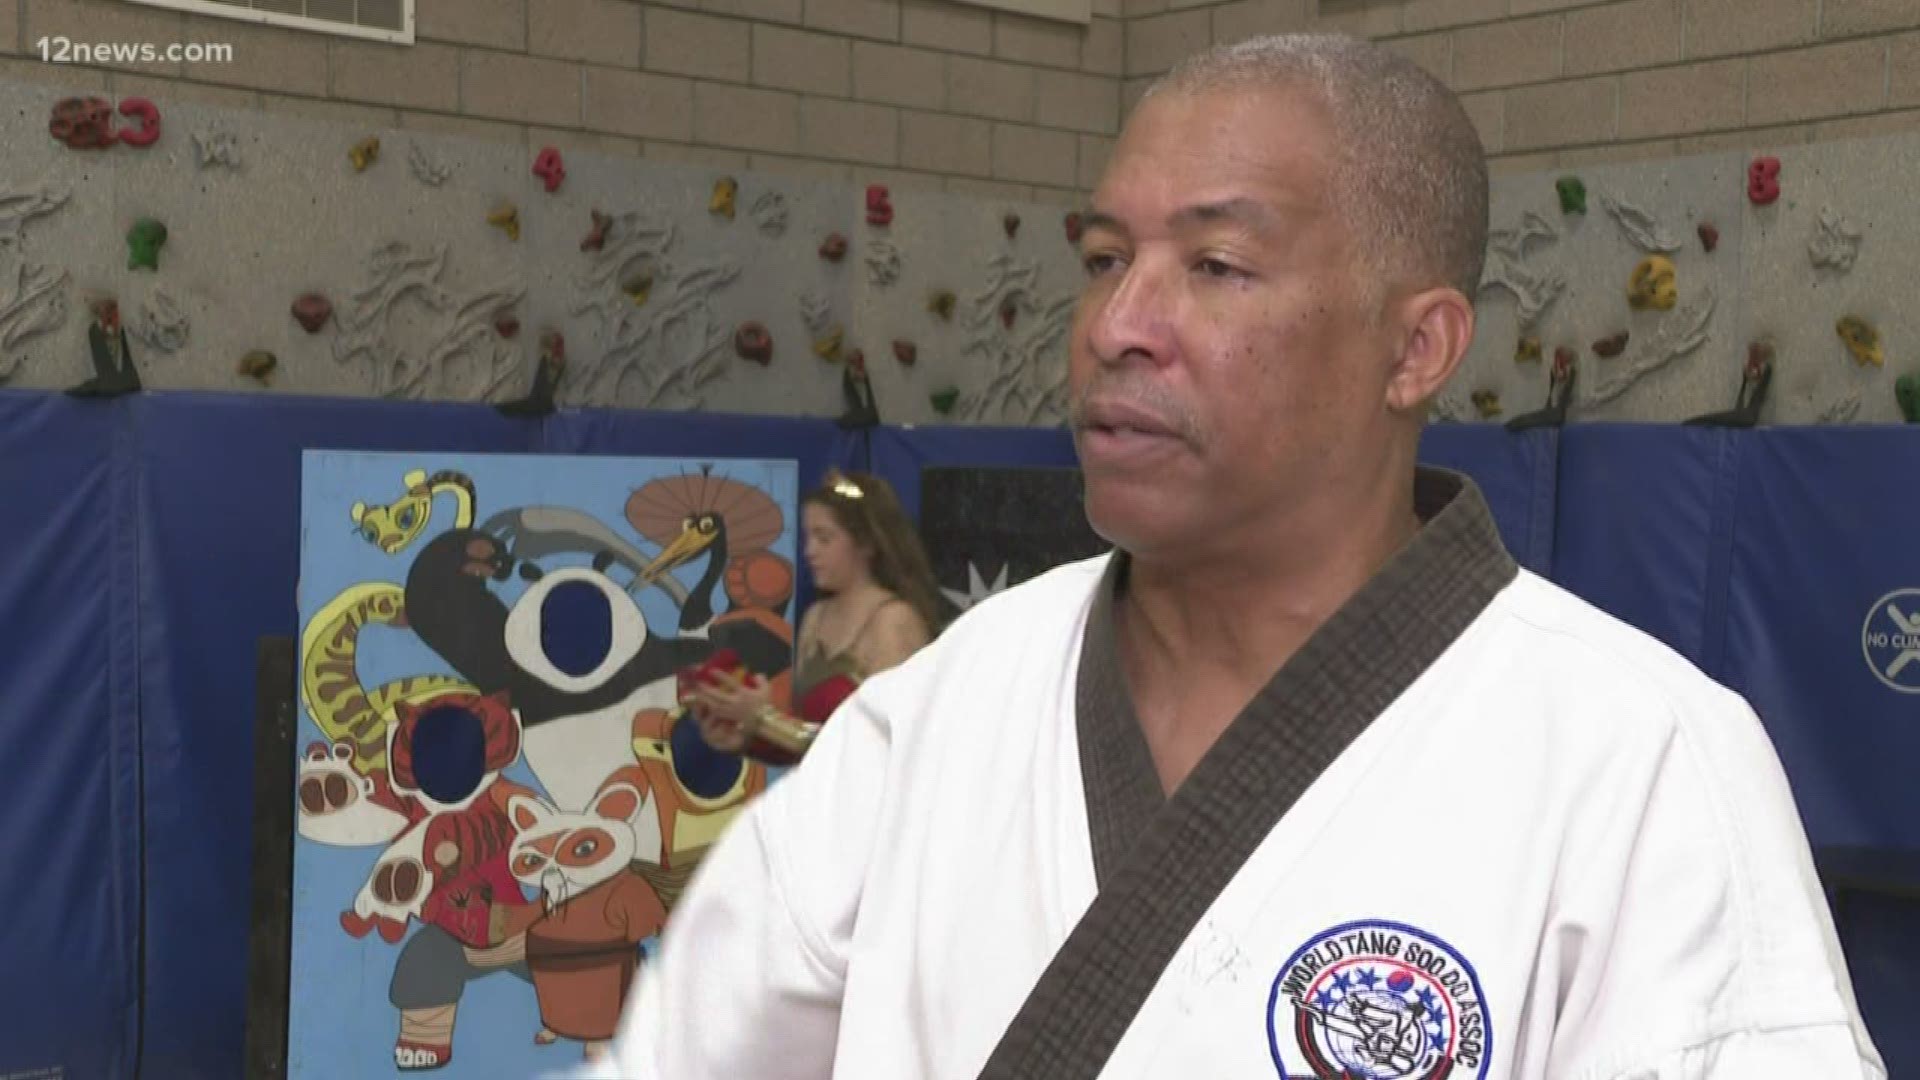 Every year, Starworld Martial Arts Academy hosts an anti-bullying carnival. Team 12's Rachel Cole has the story.